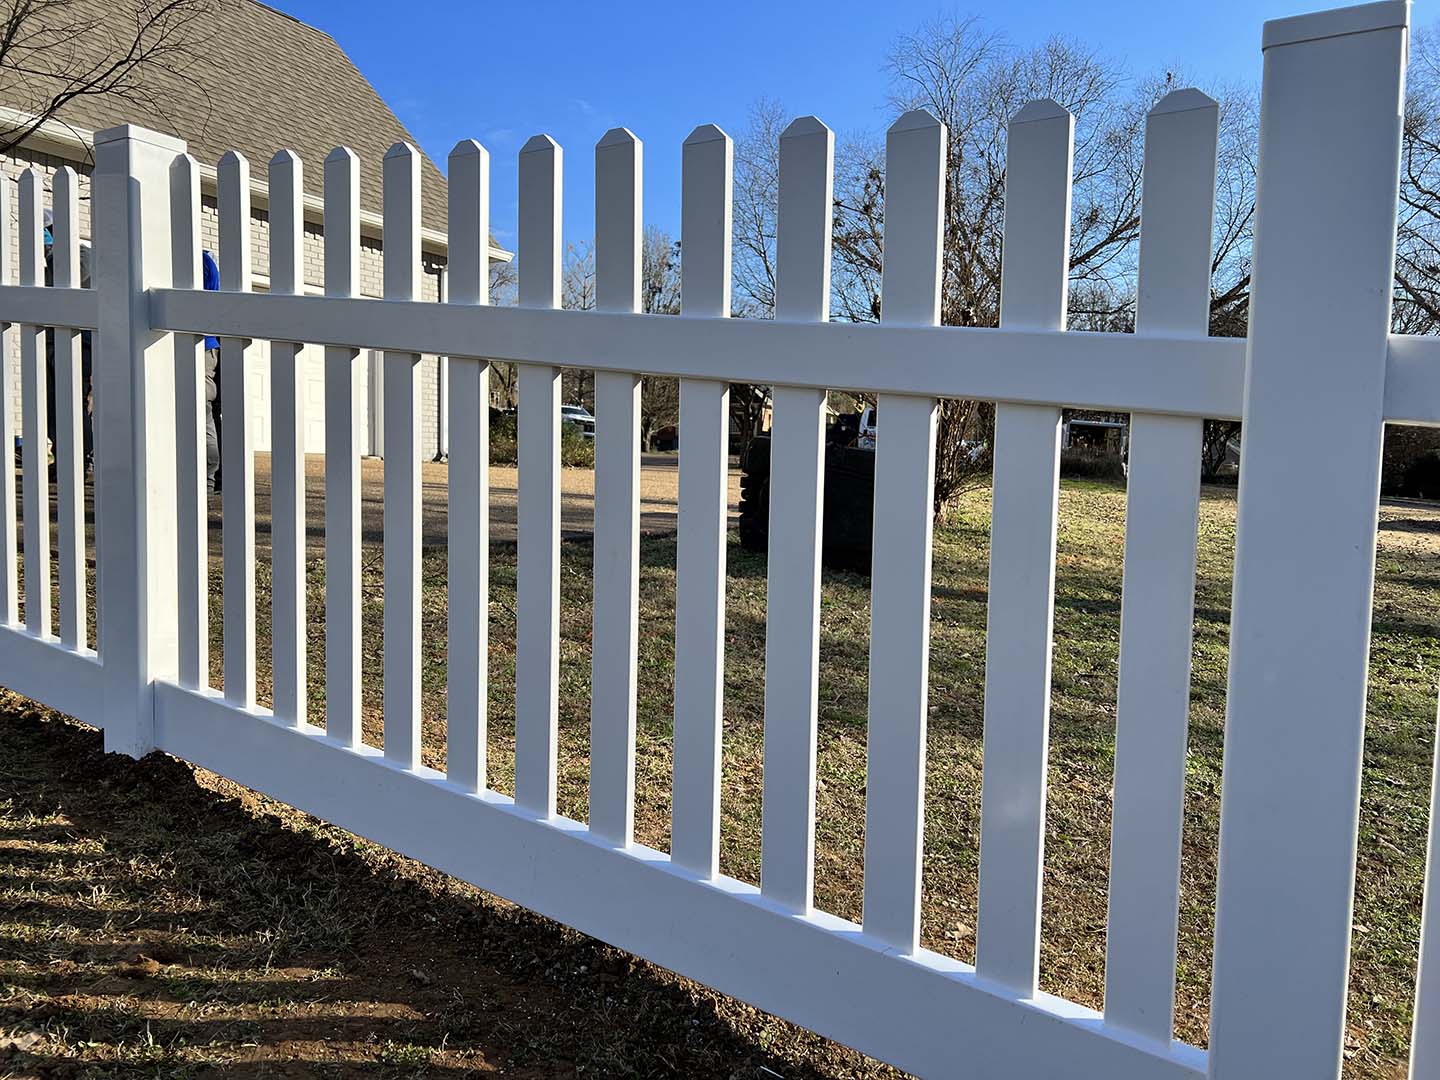  Brownsville Tennessee Fence Project Photo